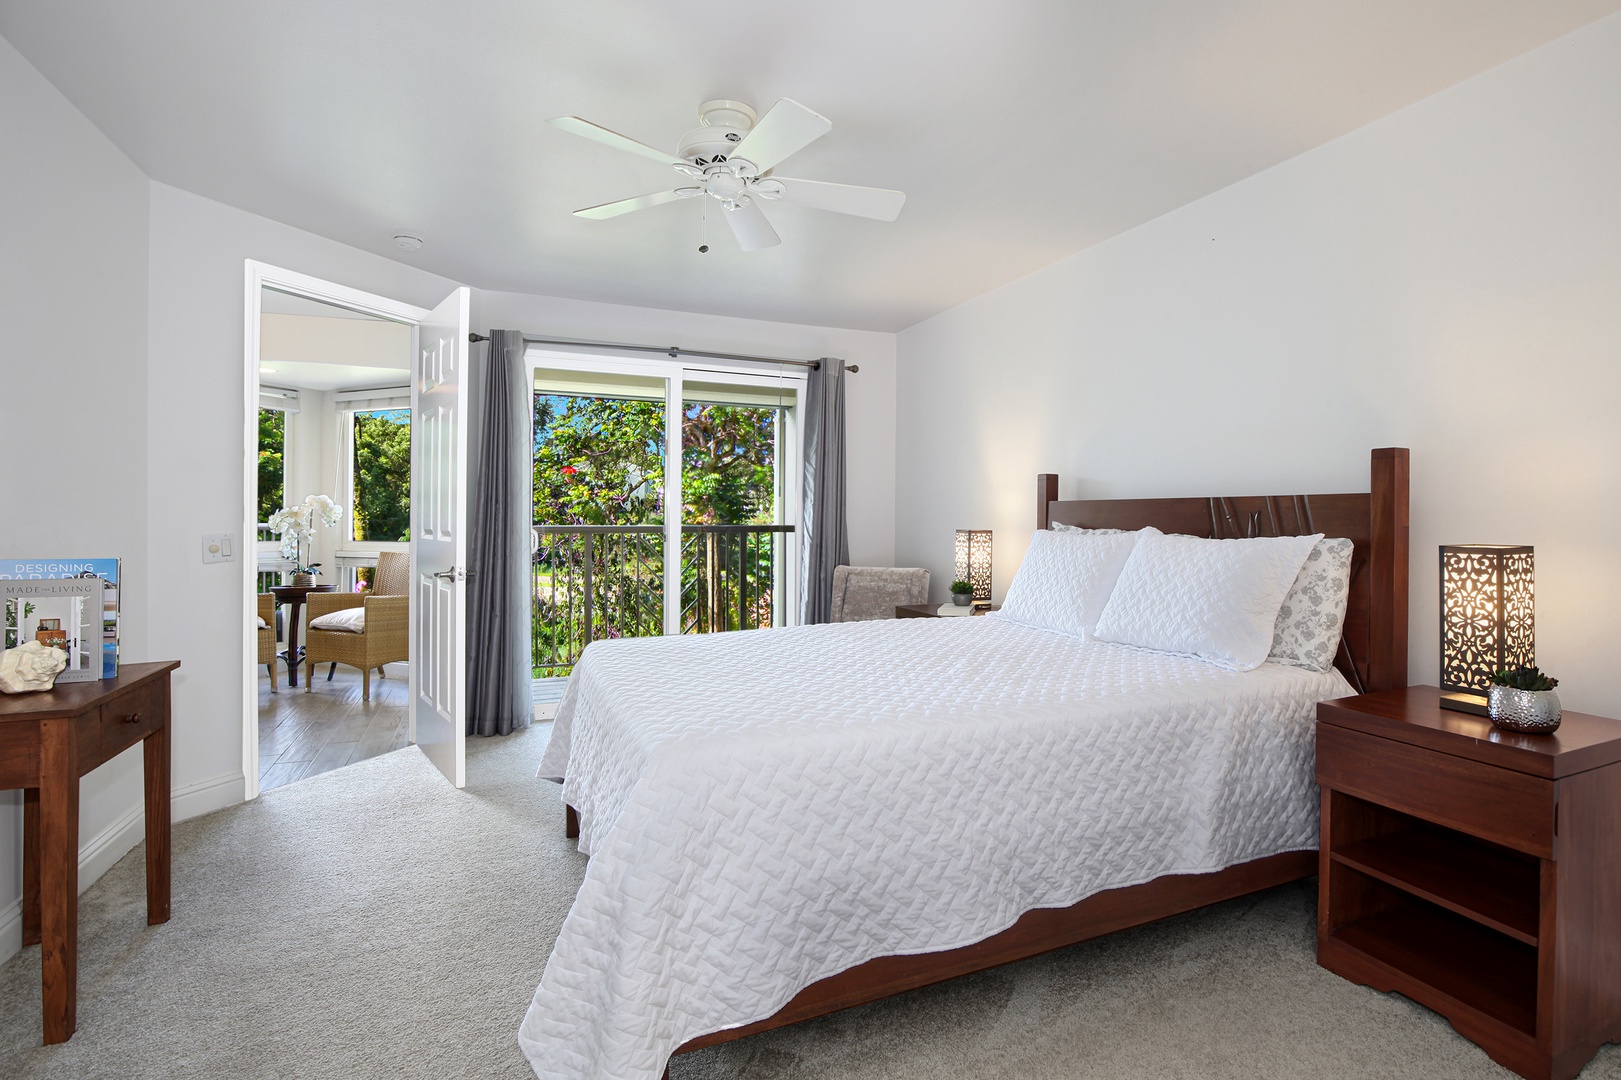 Princeville Vacation Rentals, Villas of Kamalii #35 - downstairs primary suite features a king bed has a seating area, patio access, and a soaking tub